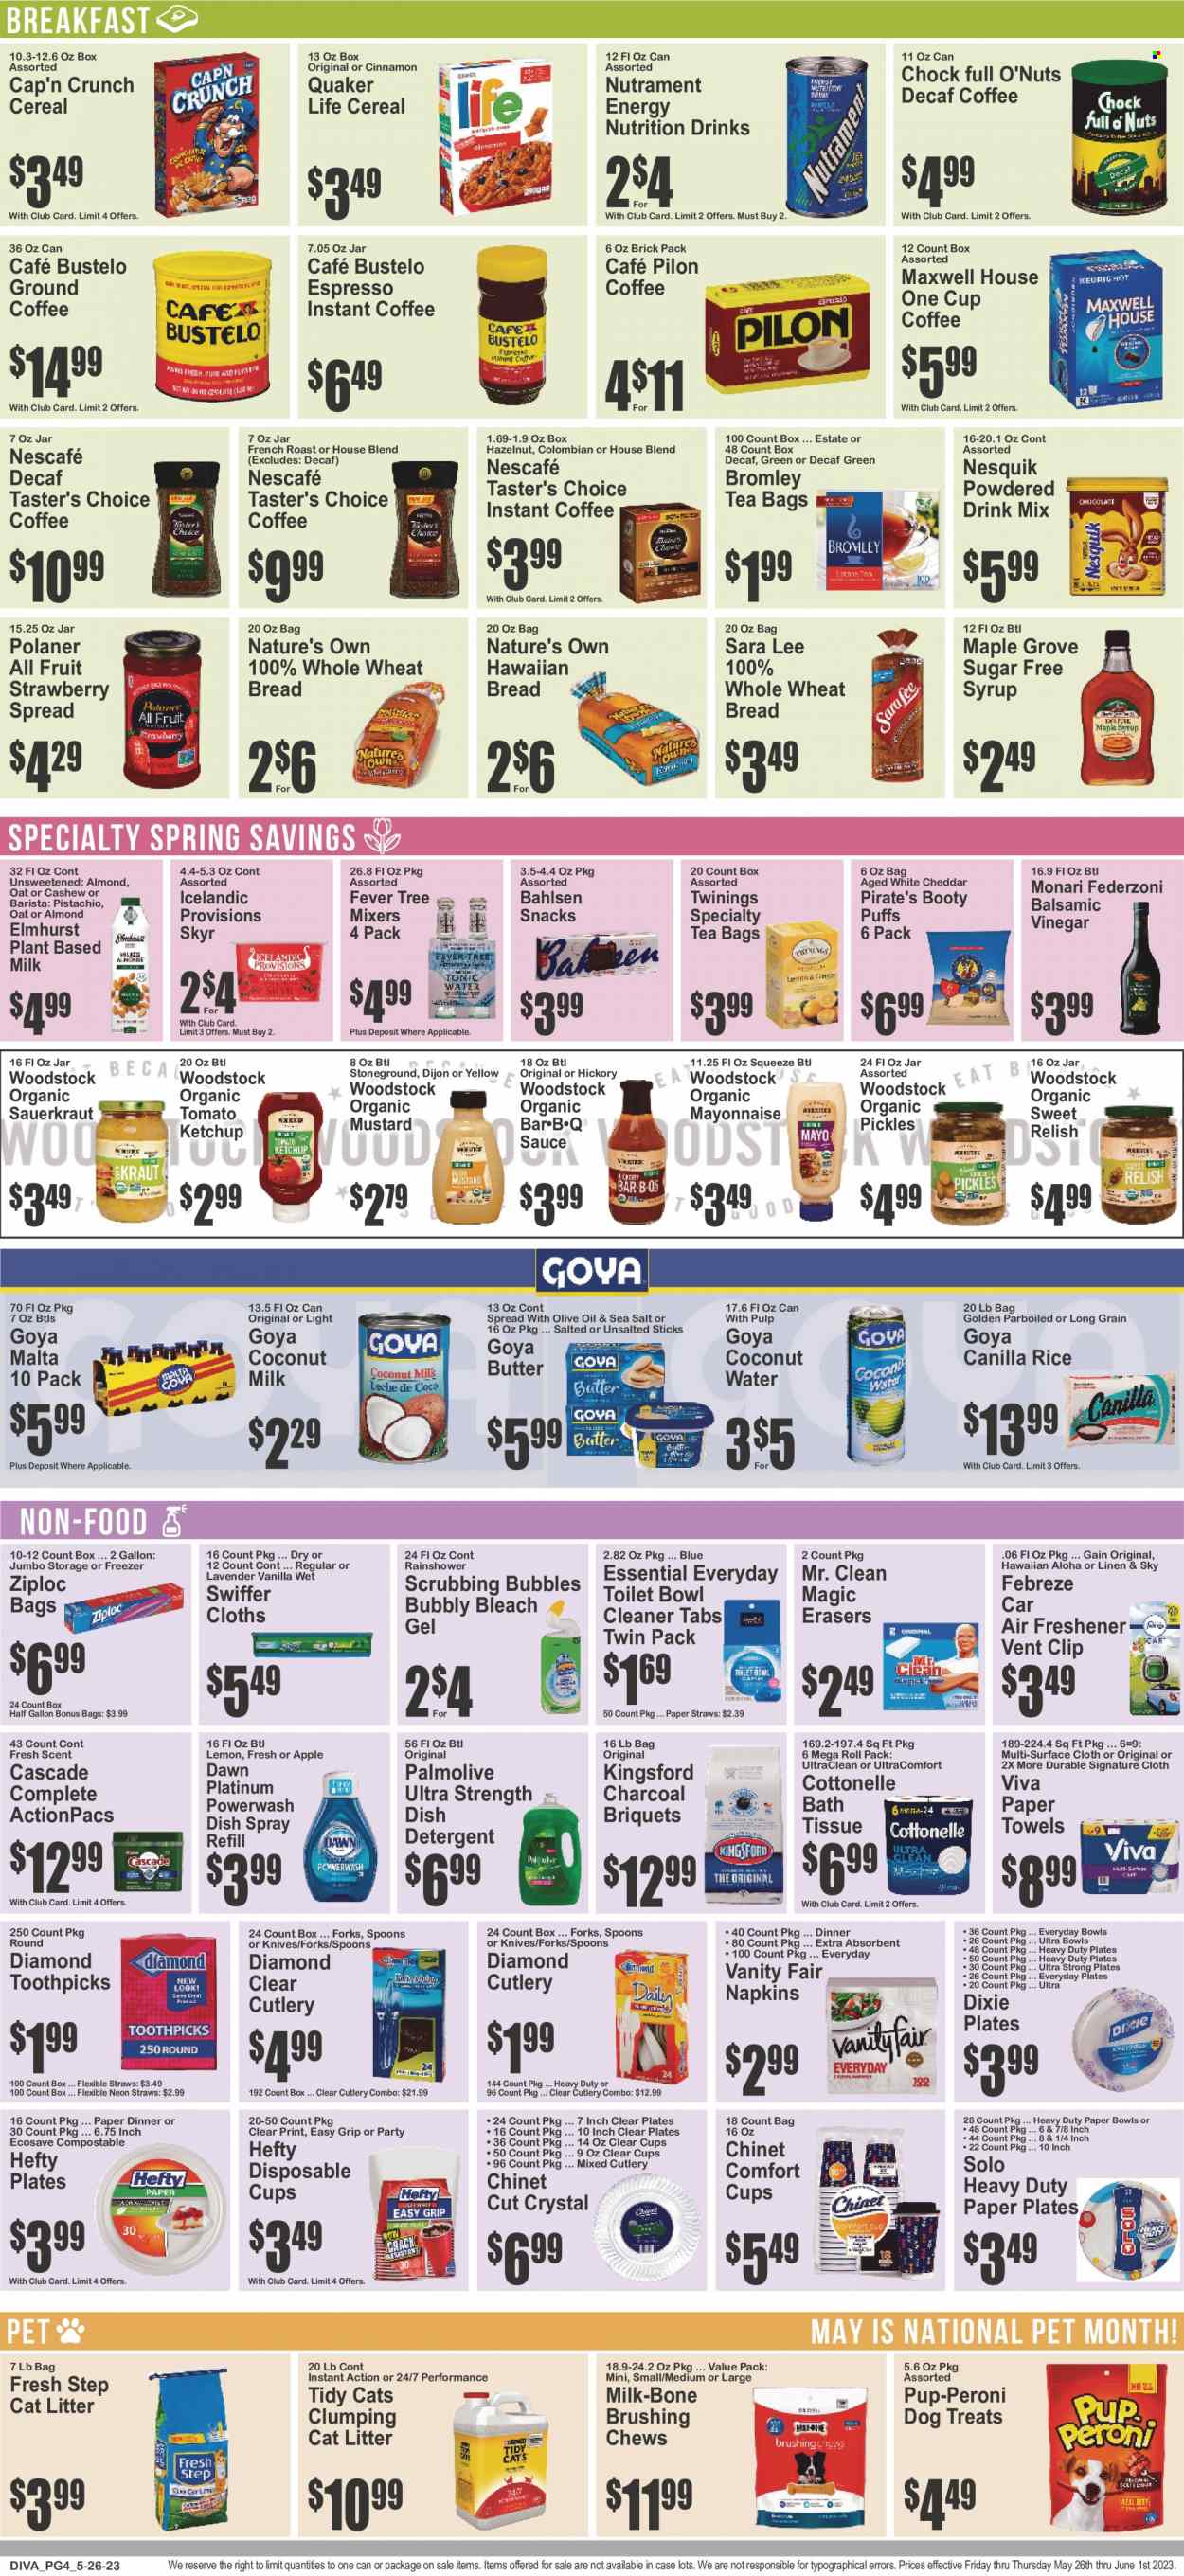 thumbnail - Key Food Flyer - 05/26/2023 - 06/01/2023 - Sales products - wheat bread, Sara Lee, puffs, sauce, Quaker, Kingsford, roast, snack, cheddar, cheese, Nesquik, butter, mayonnaise, chewing gum, coconut milk, sauerkraut, pickles, Goya, pickled cabbage, cereals, Cap'n Crunch, rice, cinnamon, mustard, ketchup, balsamic vinegar, vinegar, syrup, coconut water, water, powder drink, Maxwell House, tea bags, Twinings, coffee, instant coffee, Nescafé, ground coffee, beer, napkins, bath tissue, Cottonelle, kitchen towels, paper towels, detergent, Febreze, Gain, Scrubbing Bubbles, cleaner, bleach, toilet cleaner, Swiffer, Cascade, dishwasher cleaner, Palmolive, Ziploc, Hefty, knife, spoon, plate, cup, straw, air freshener, paper plate, paper bowl, Dixie, cat litter, Pup-Peroni, Fresh Step, Nature's Own. Page 5.